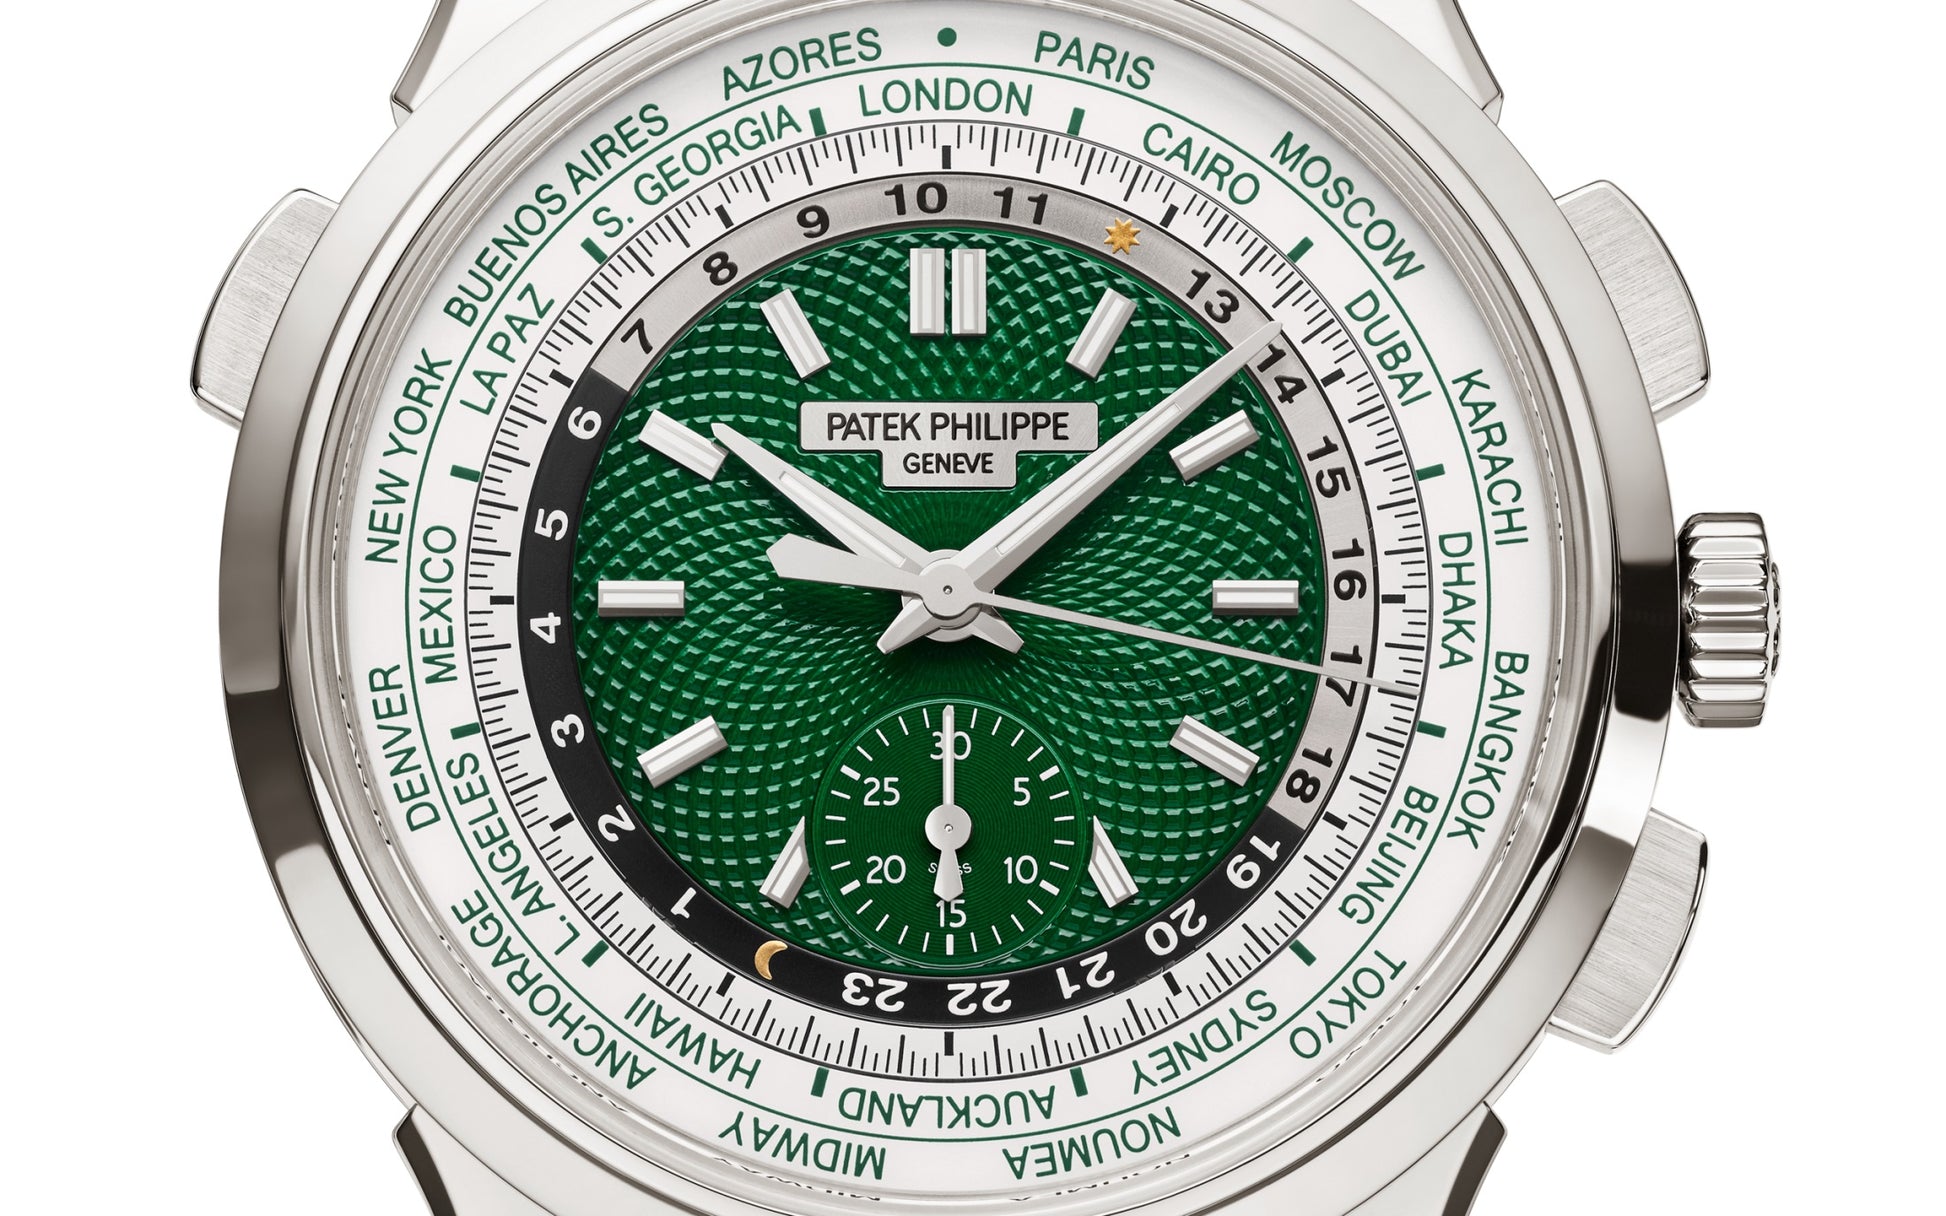 Patek Philippe Complication World-Time flyback Chronograph, Platinum, 39,5mm, Ref# 5930P-001, Dial